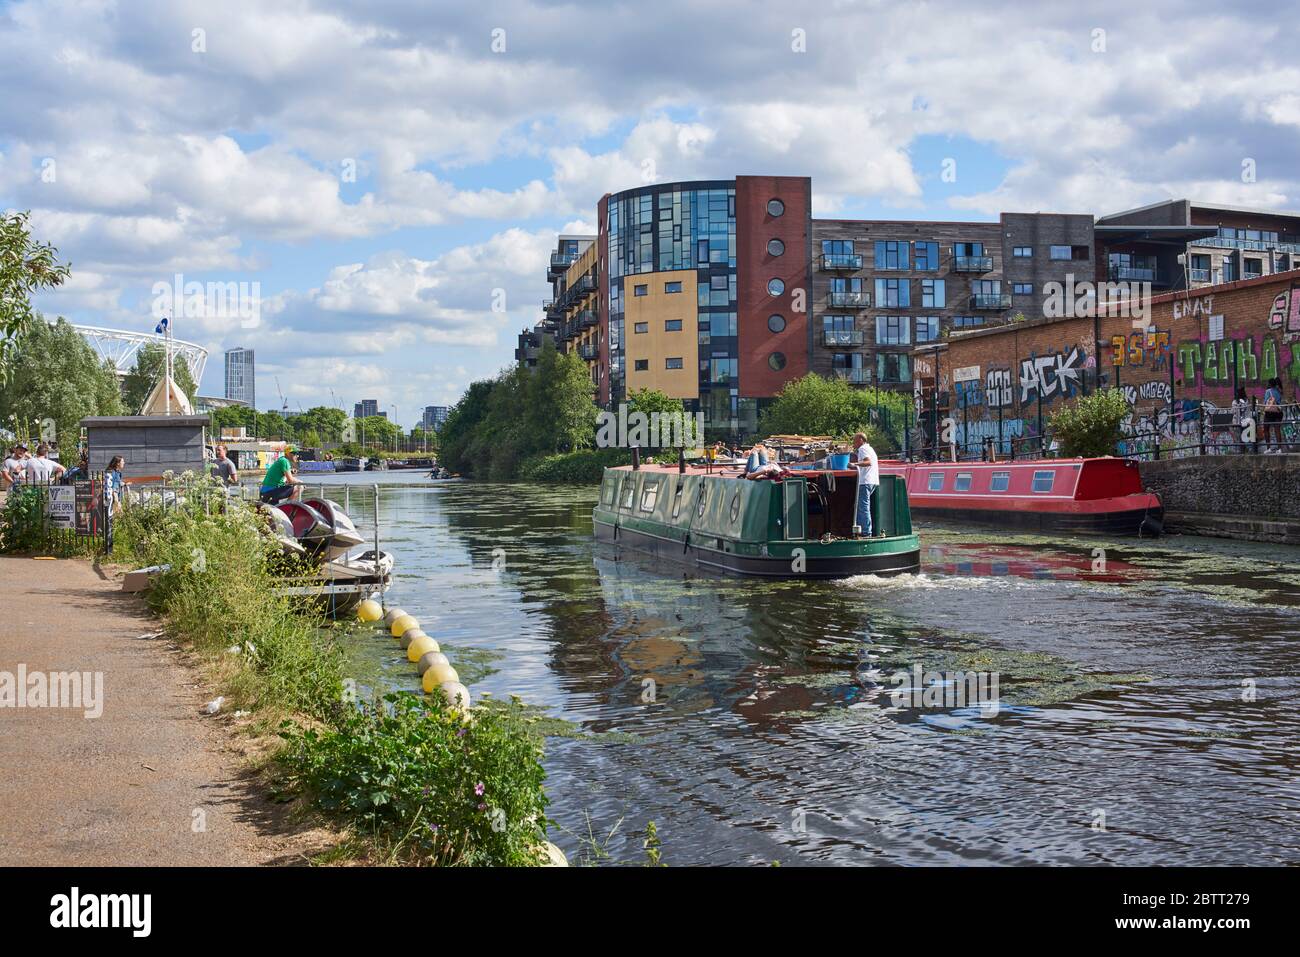 The River Lea at Hackney Wick, East London UK, with narrowboats and new apartment buildings Stock Photo